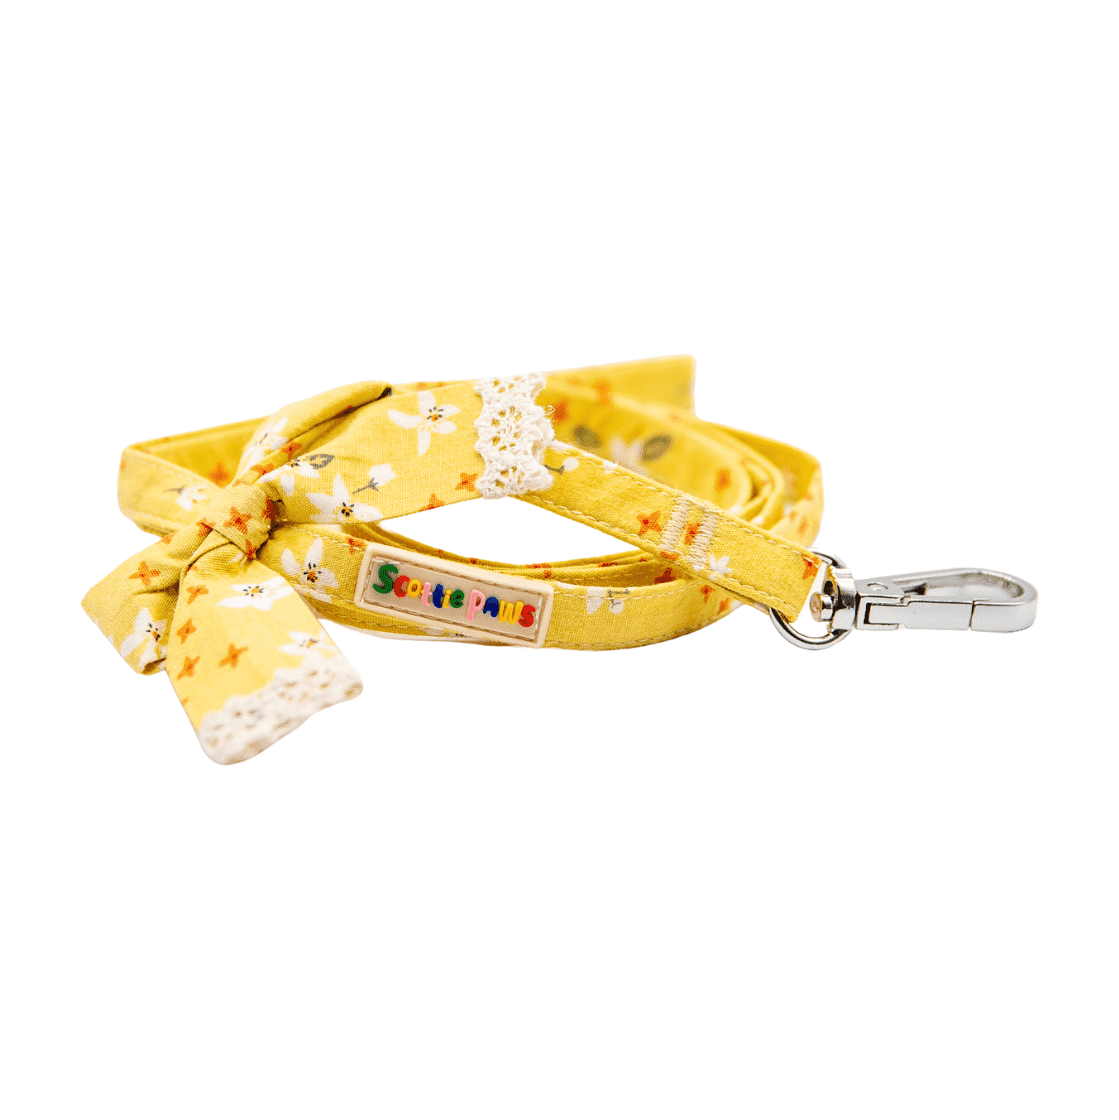 Daisy Delights Harness and Lead Set